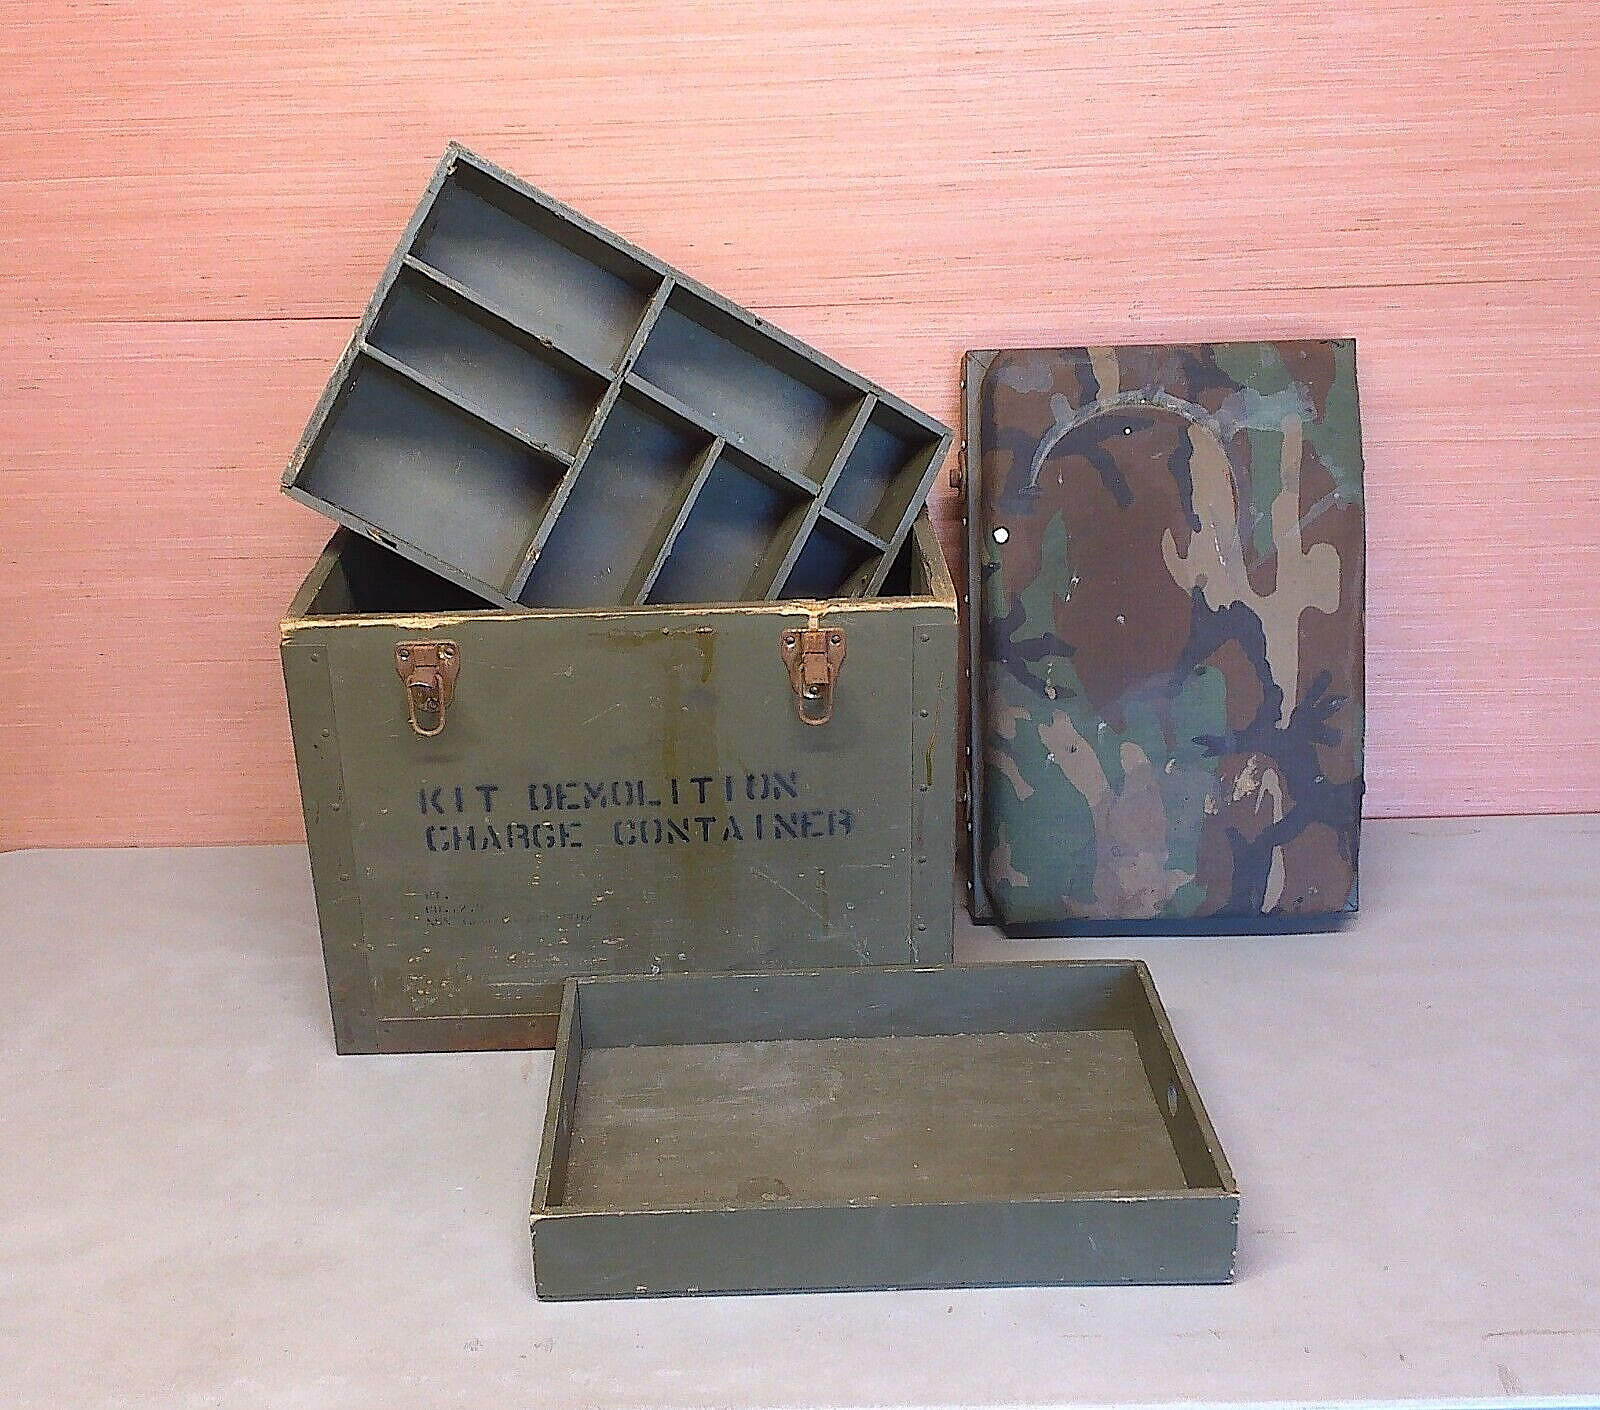 Vintage US Military Issue Demolition Kit Charge Container Box Case OD Green